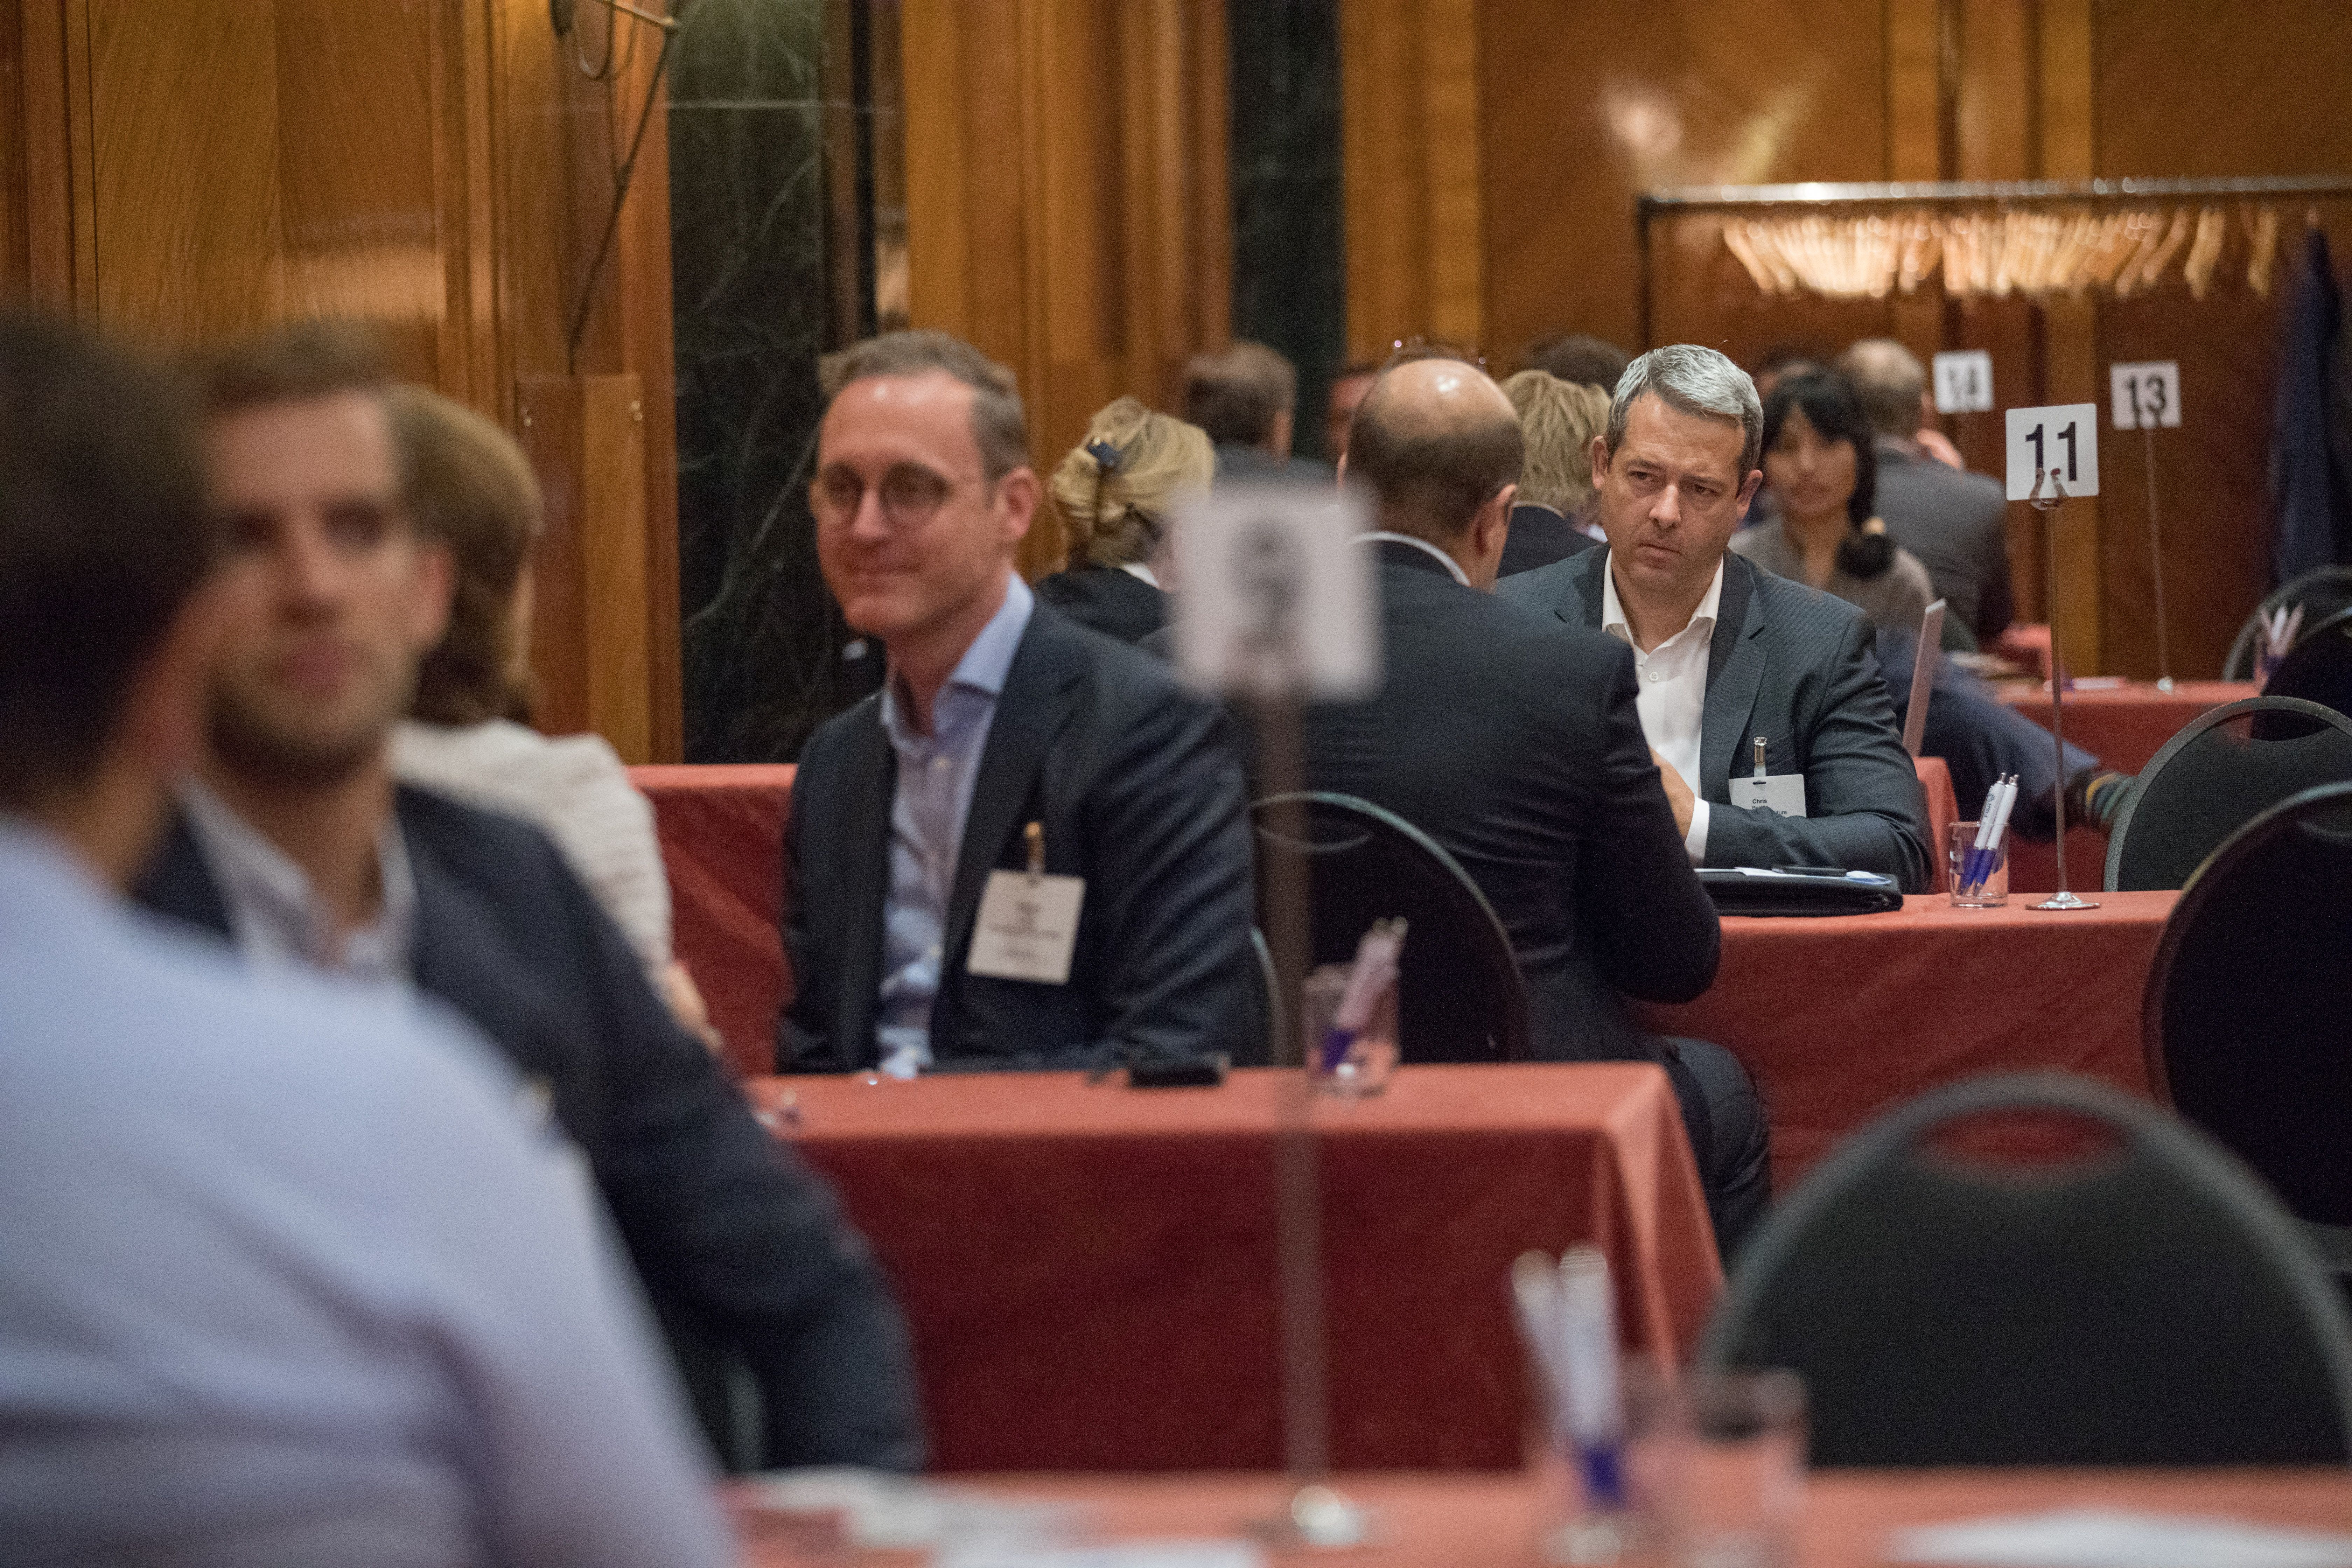 Delegates at last year's Aquaculture Innovation summit in London